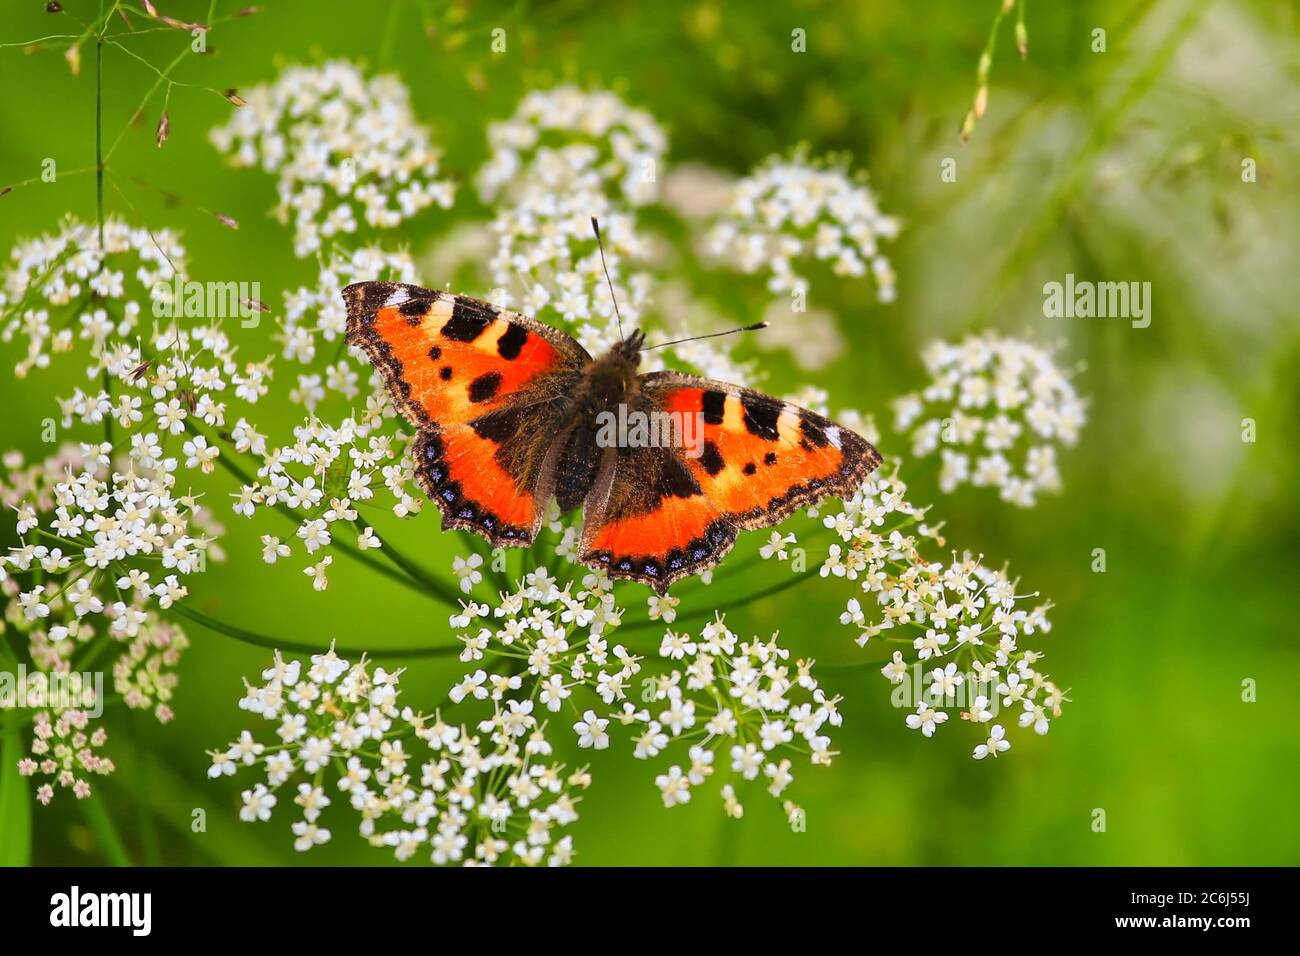 Small Tortoiseshell butterfly, Aglais urticae, feeding on white flowers of Cow parsley, Anthriscus sylvestris. Stock Photo